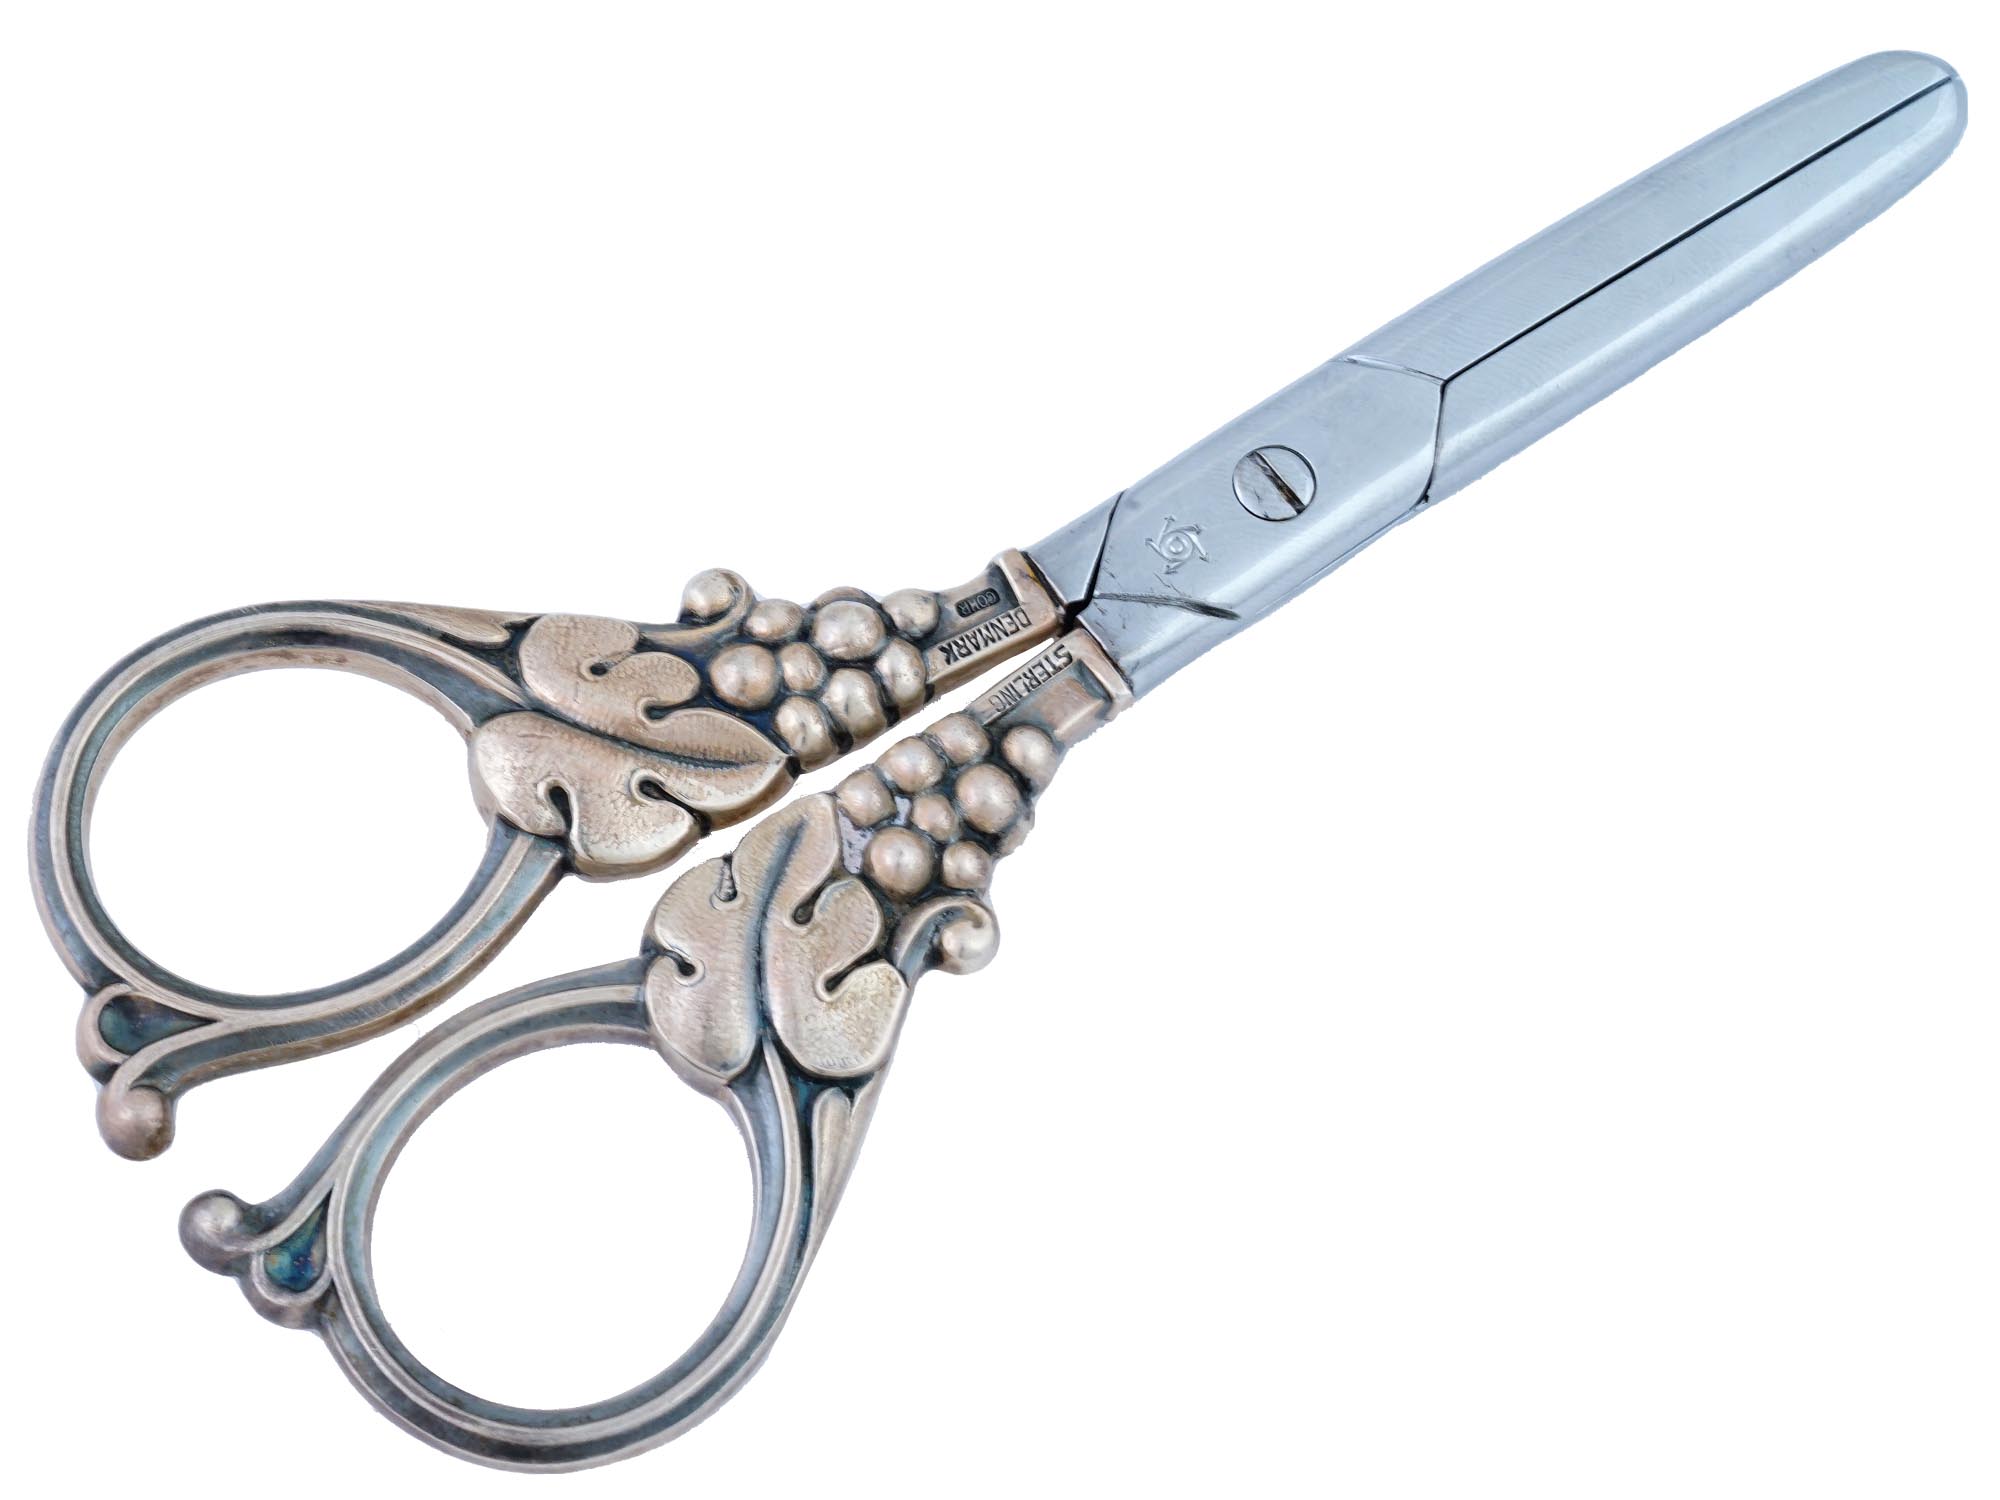 COHR DENMARK STERLING SILVER AND STEEL SCISSORS PIC-0